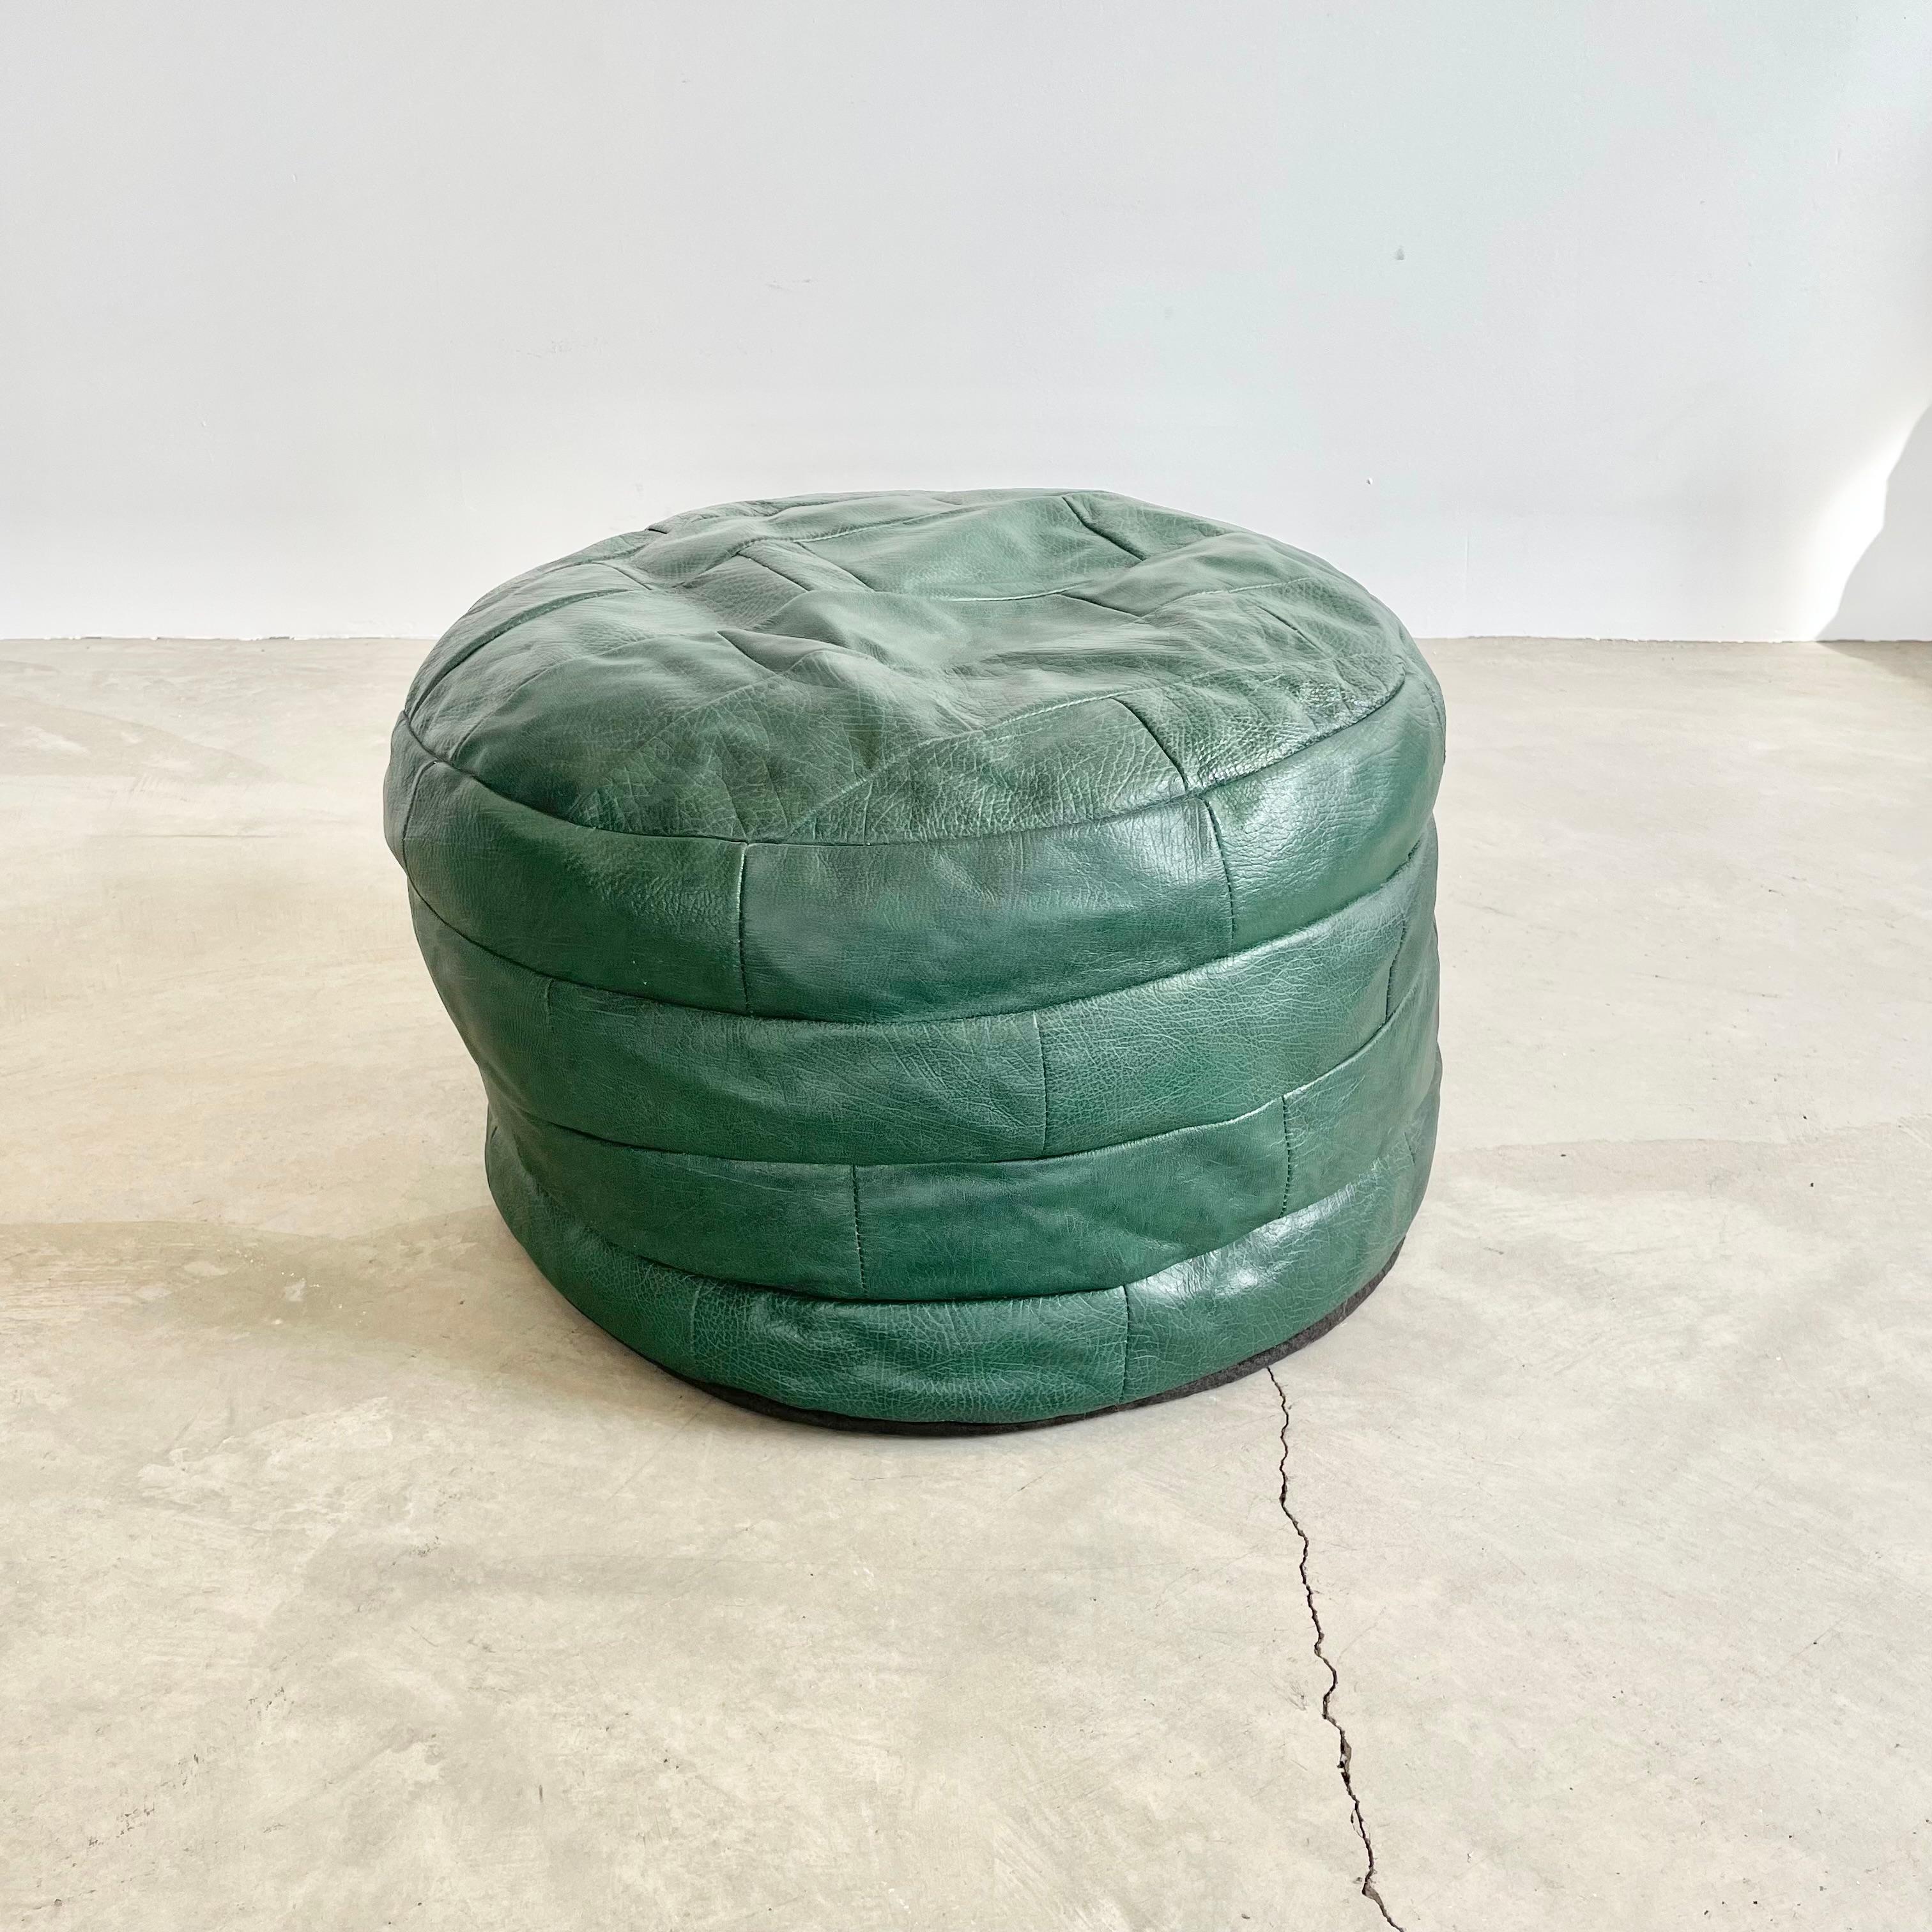 Stunning emerald green leather pouf/ottoman by Swiss designer De Sede with square patchwork. Handmade with wonderful light patina. Gorgeous accent piece. Good vintage condition with soft supple leather. Brand new filler. Unusual color. Perfect